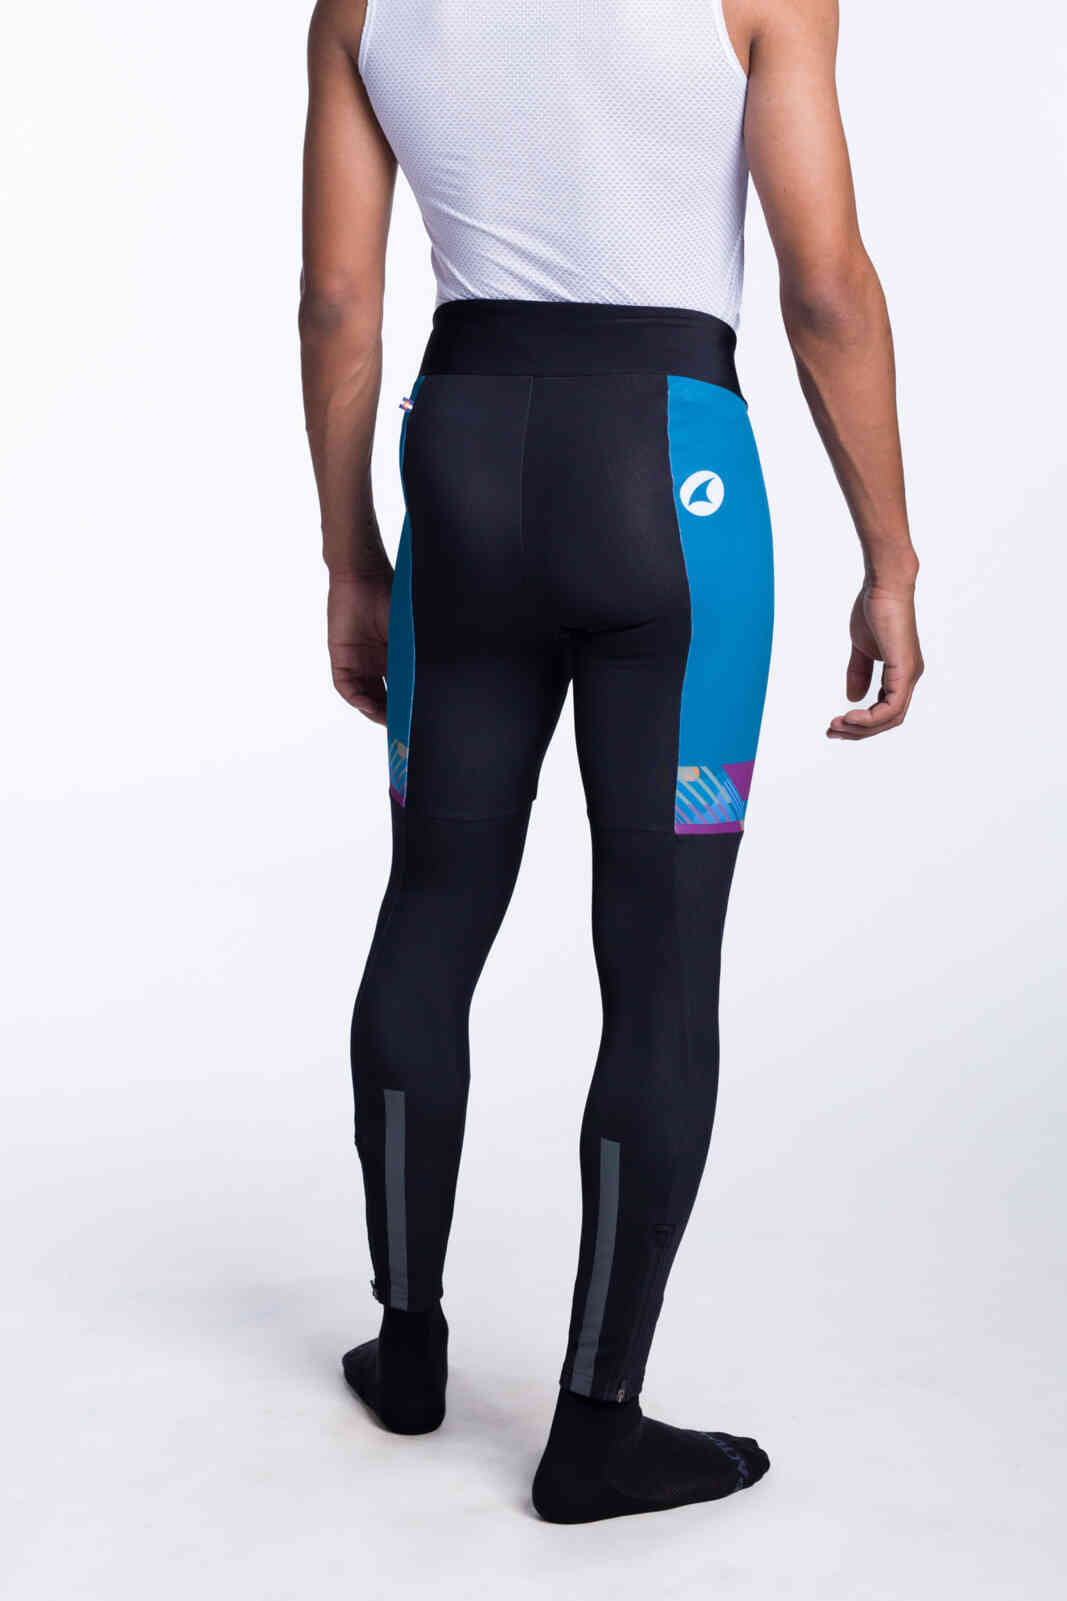 Thermal CLIMABARRIER Cycling Tights Men's, Activity, ONLINE SHOP